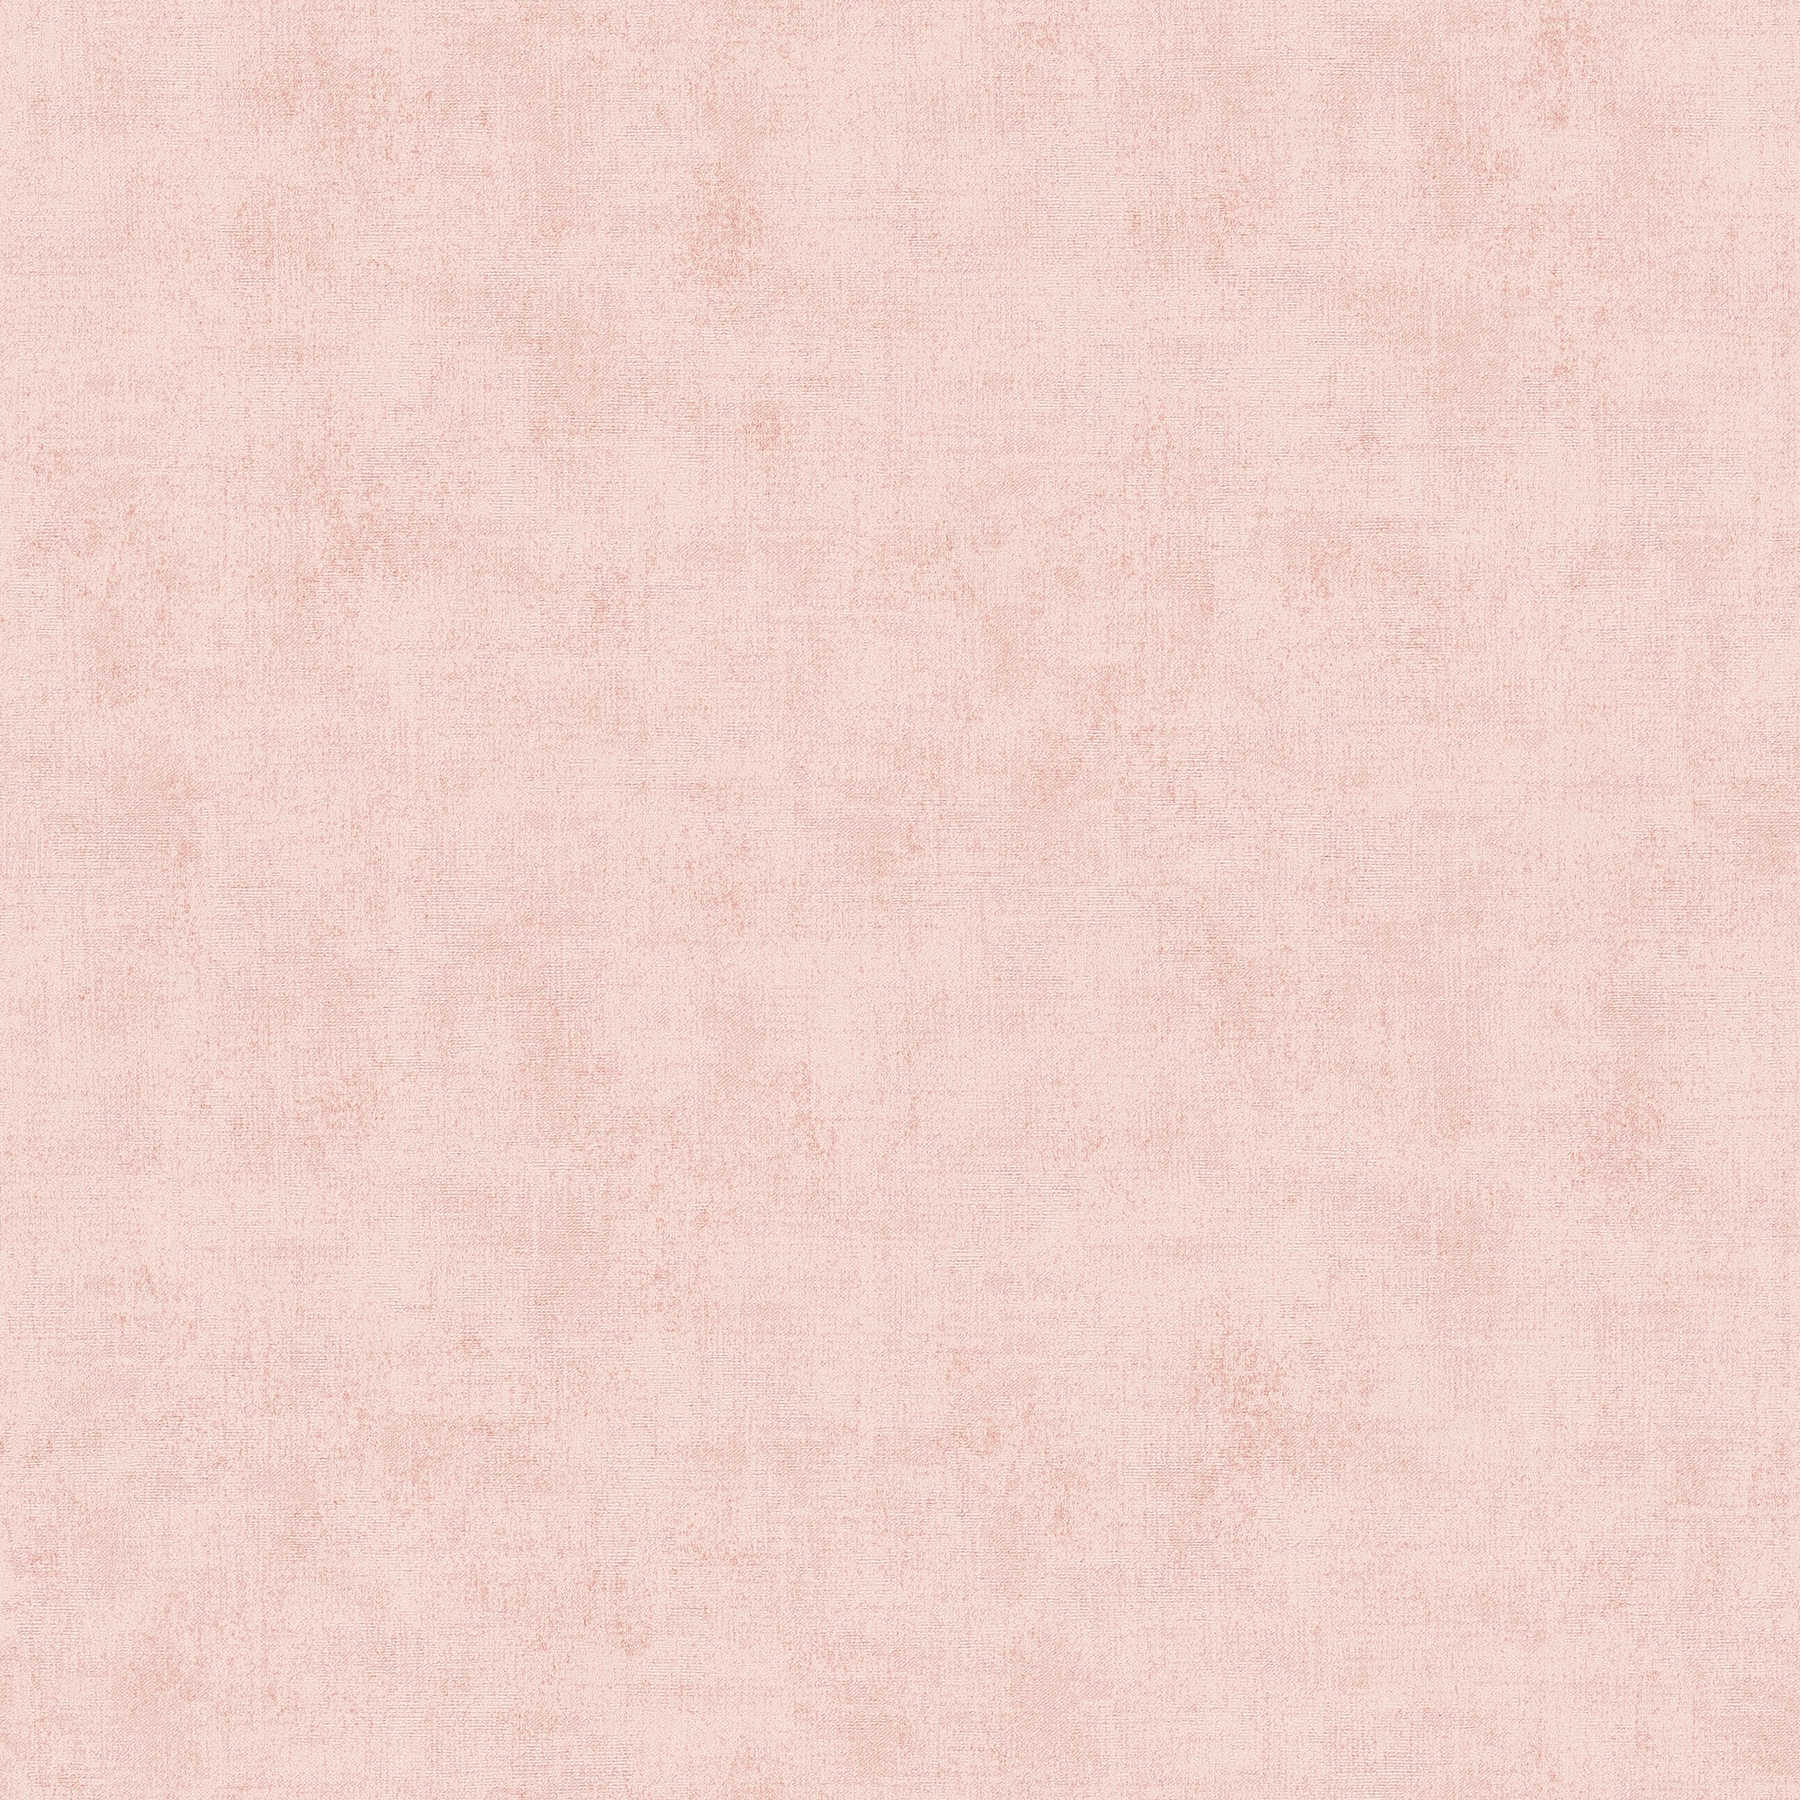         Wallpaper with discreet structure design - pink
    